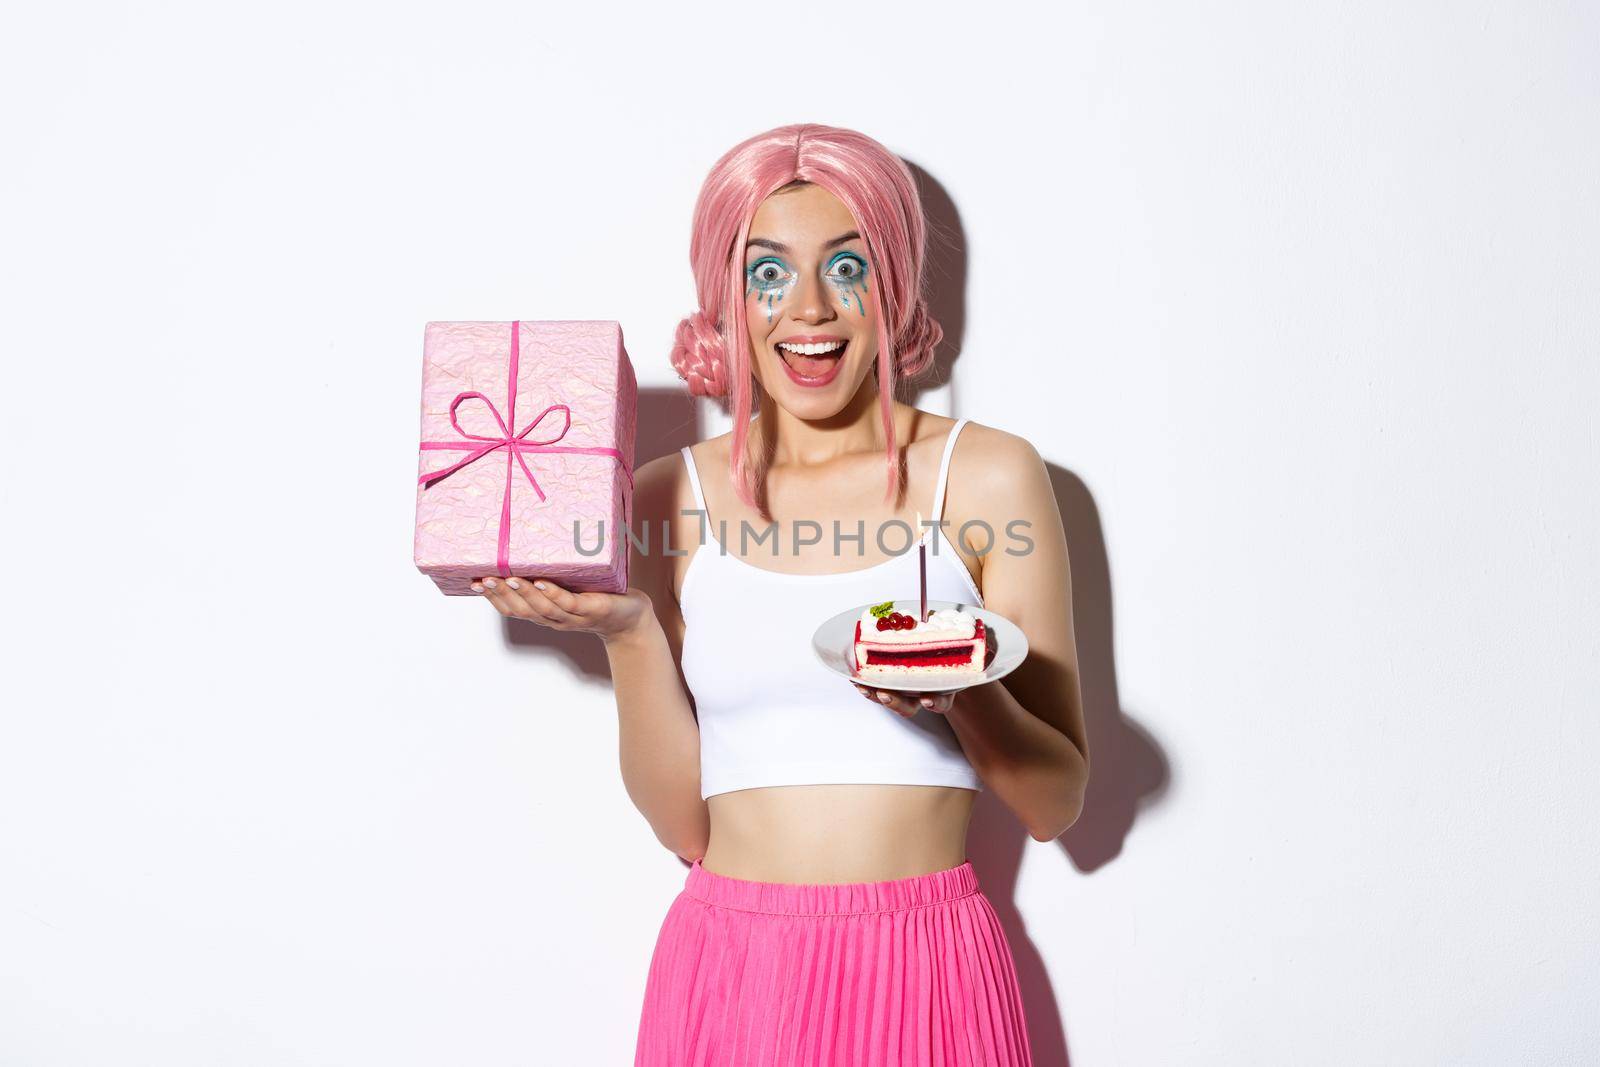 Portrait of surprised beautiful girl in pink wig, receive birthday gift, holding b-day cake and smiling happy, standing over white background.